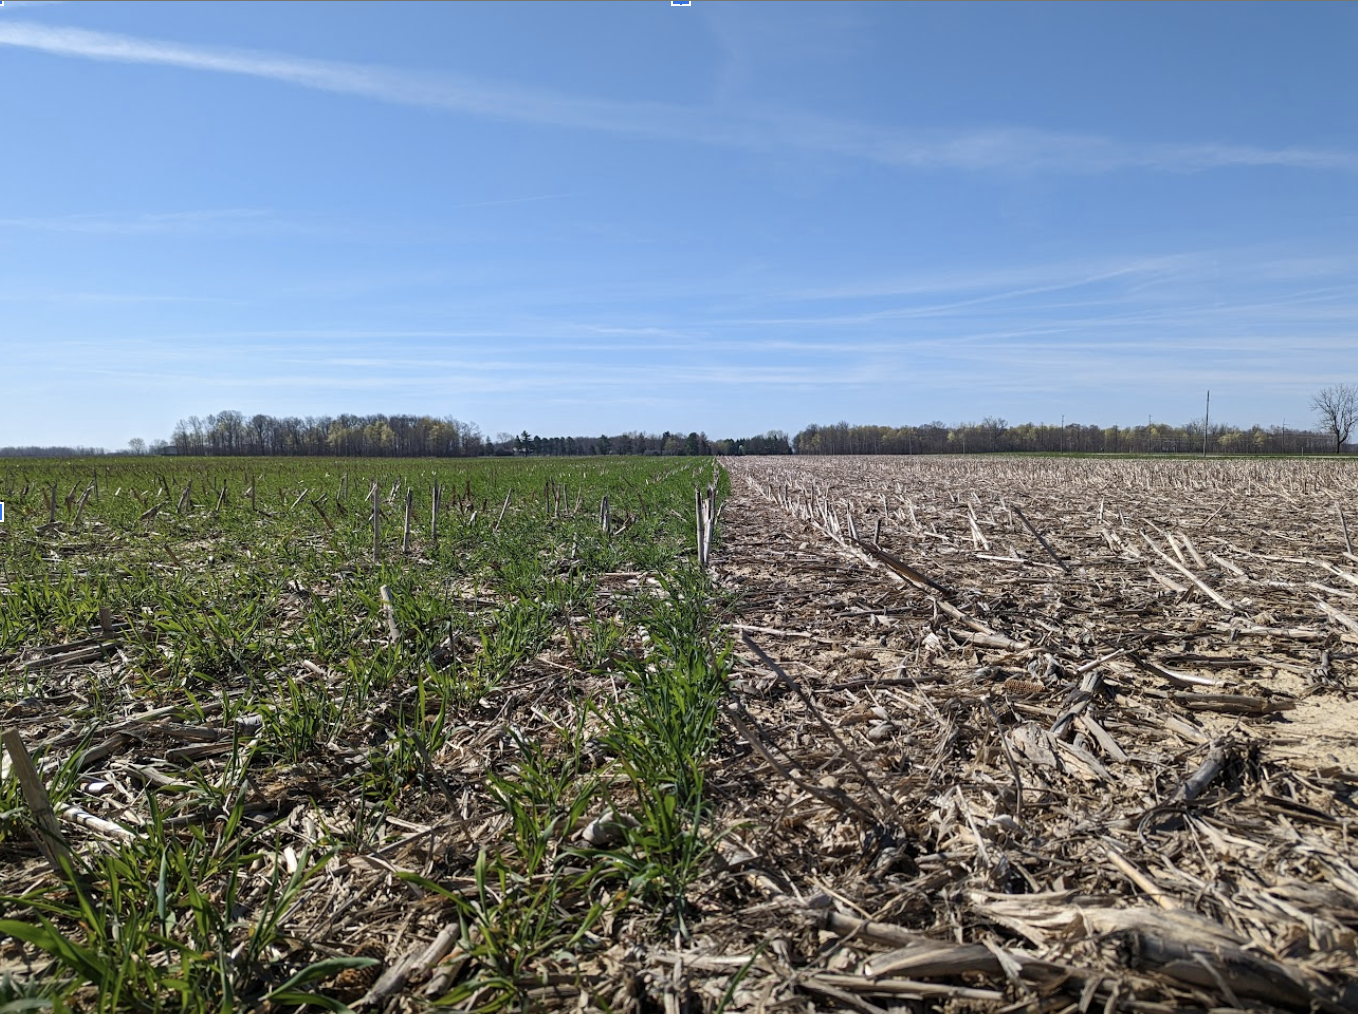 Indiana farm showing cover crops next to field without cover crops